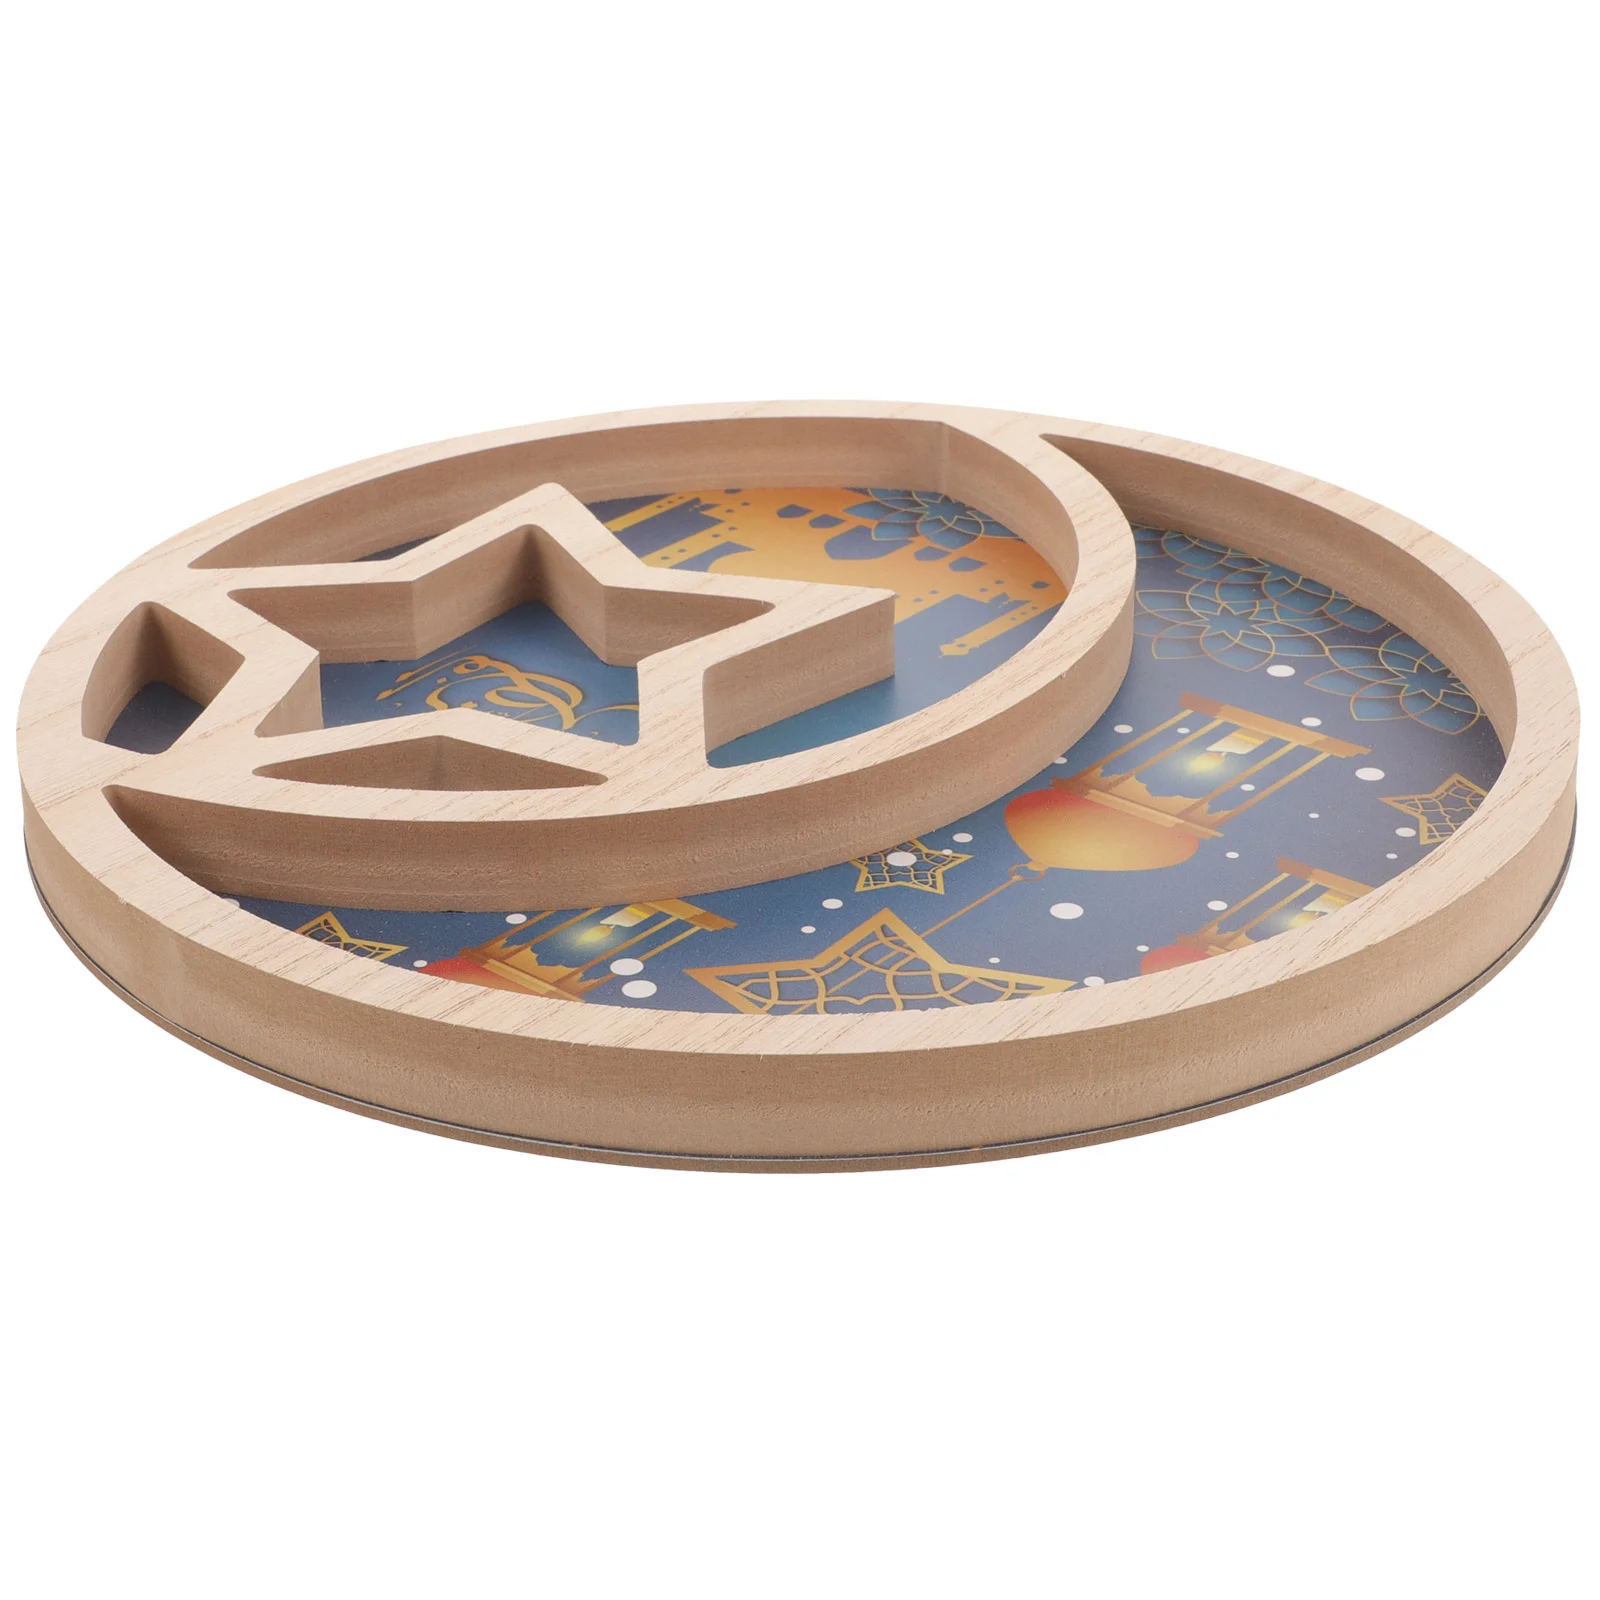 

Wooden Star and Moon Tray Festival Party Food Serving Ramadan Decorations Eid Dried Fruits Mubarak Dessert Tabletop